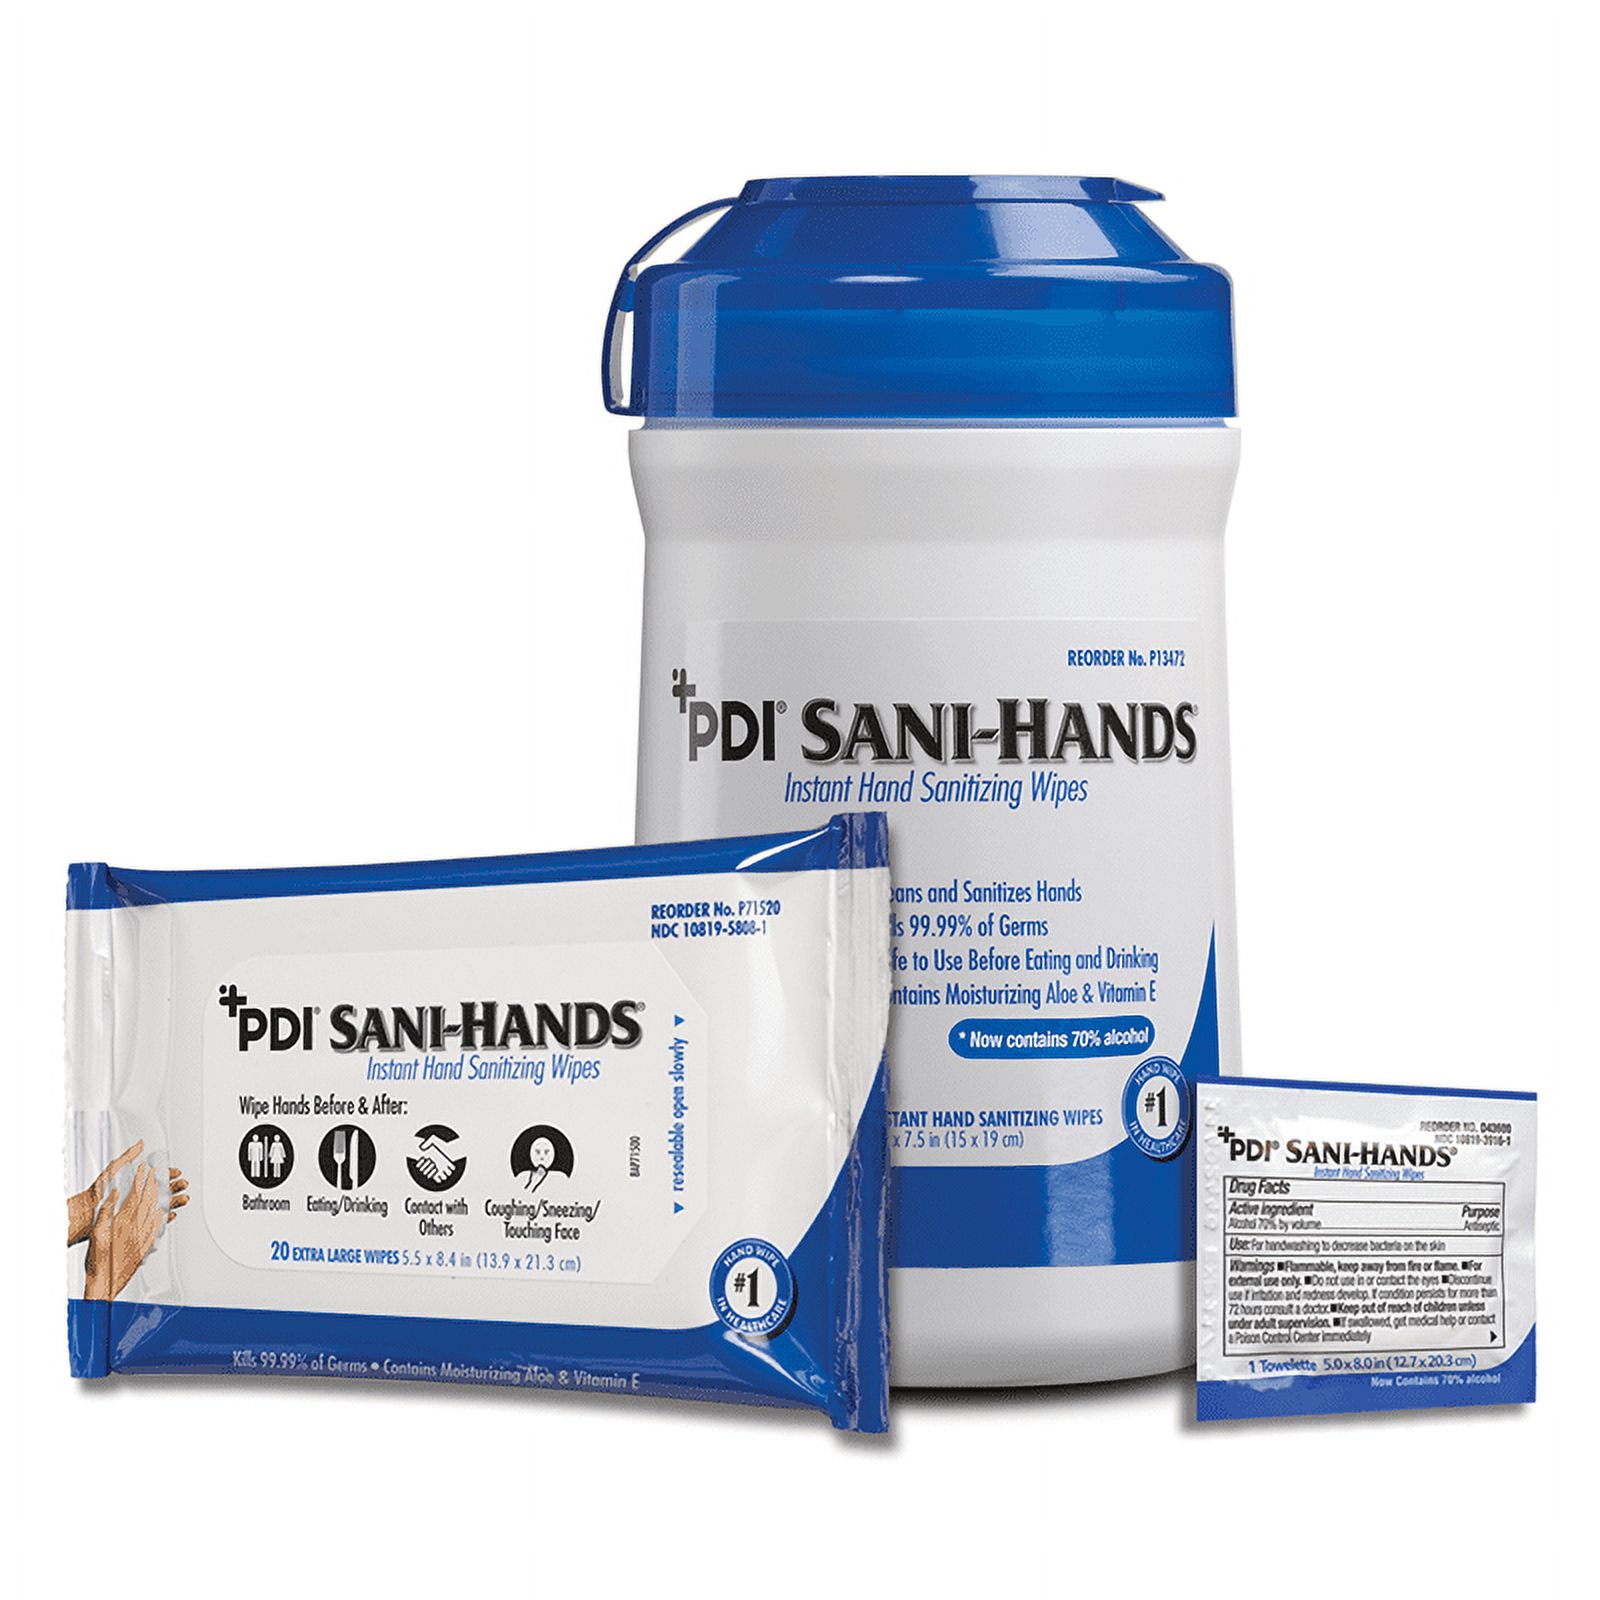 P71520 Sani-Hands Bedside Pack , Soft Pack, 20, Wipes By PDI - image 5 of 5